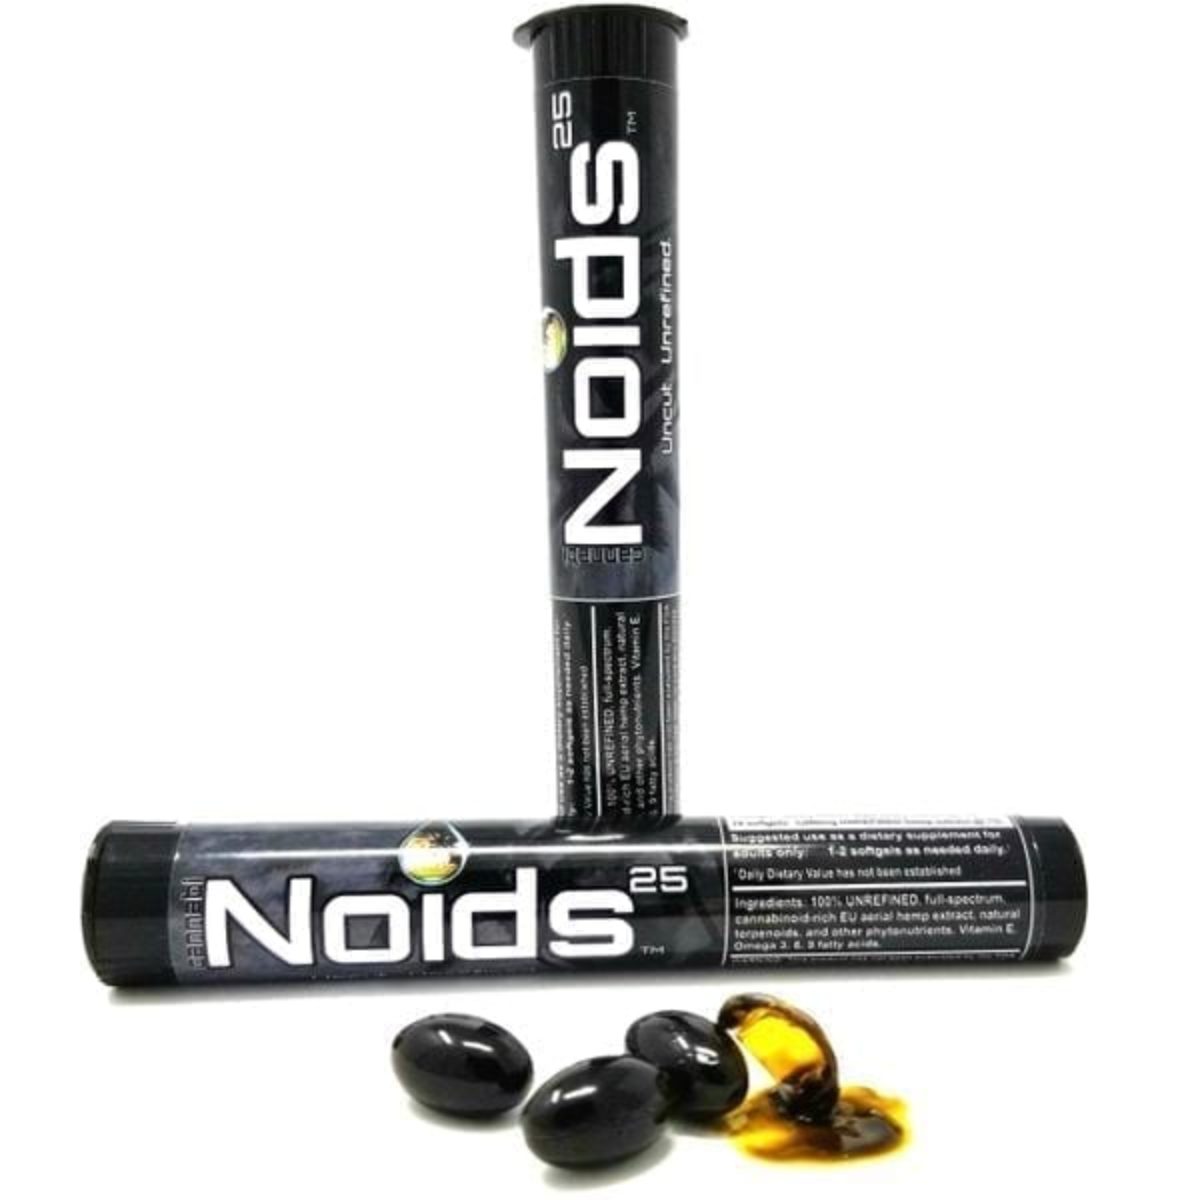 Noids CBD For The People